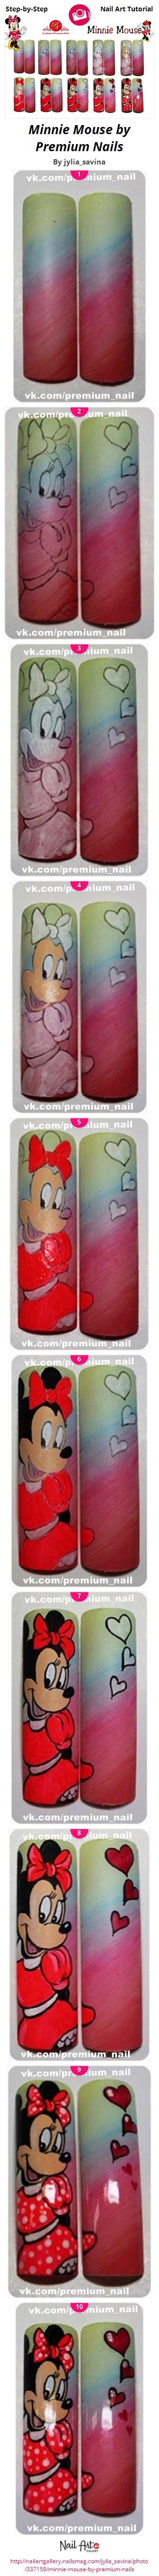 Minnie Mouse by Premium Nails - Nail Art Gallery